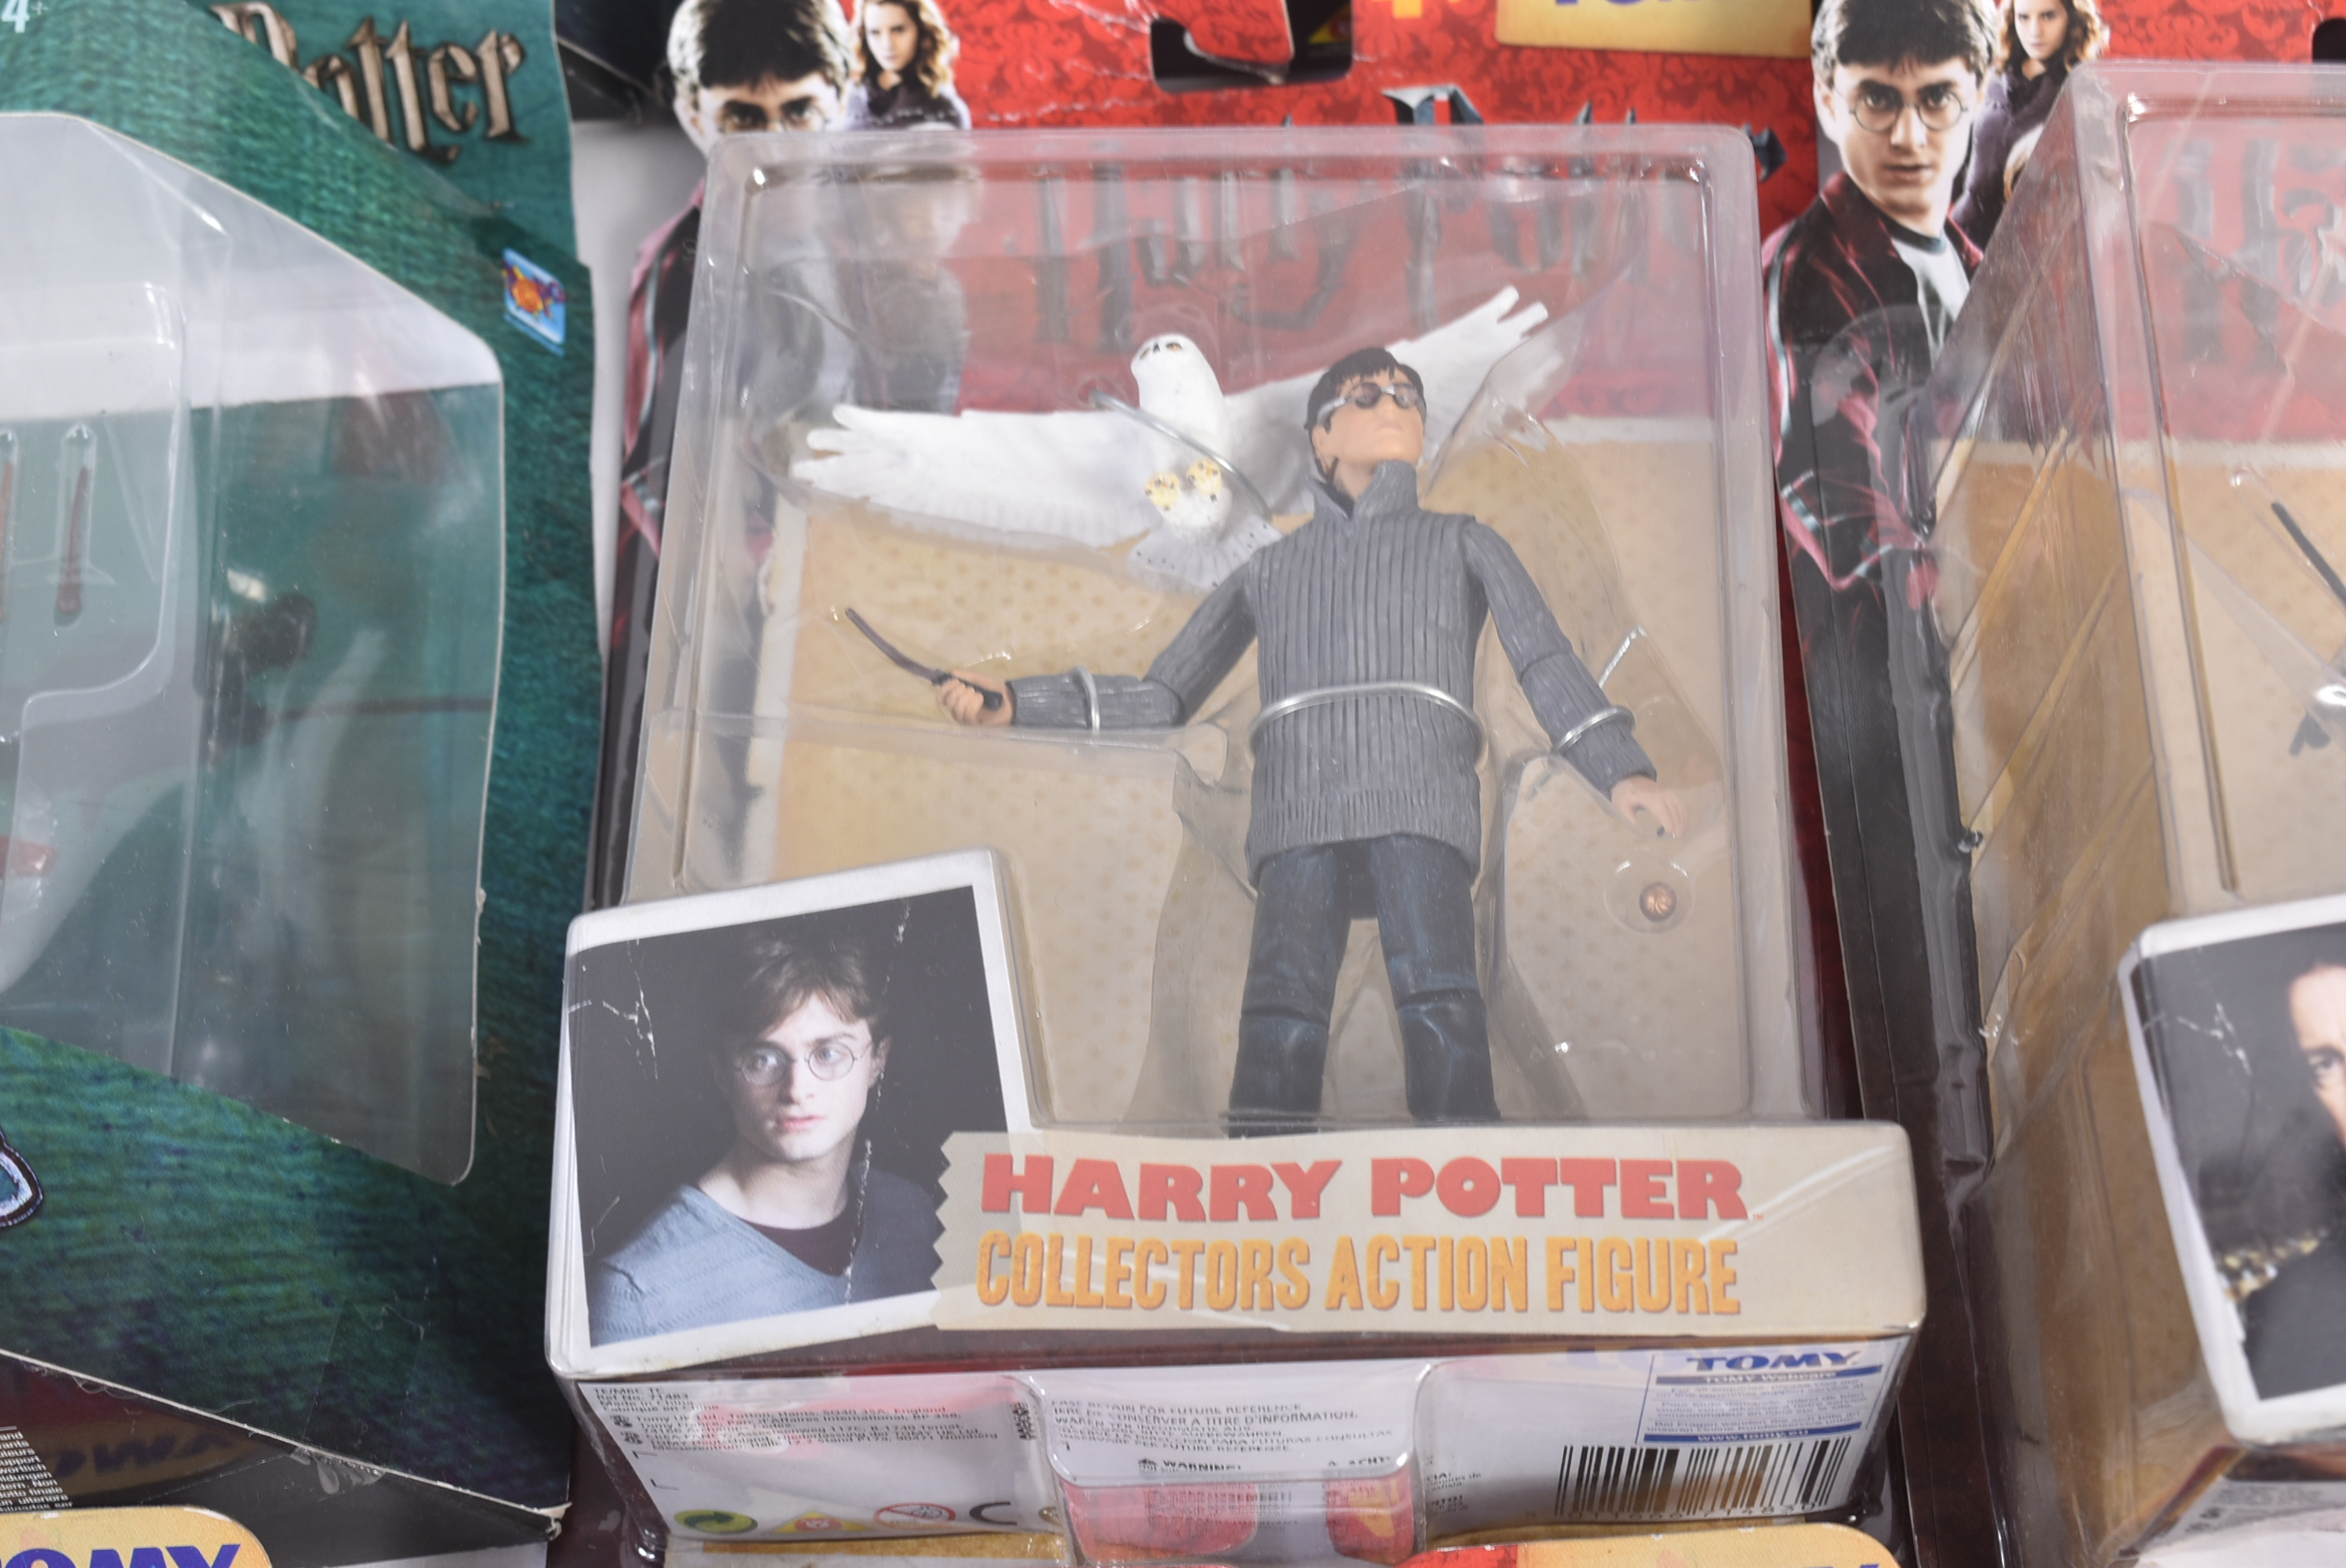 COLLECTION OF HARRY POTTER COLLECTORS ACTION FIGURES - Image 5 of 6